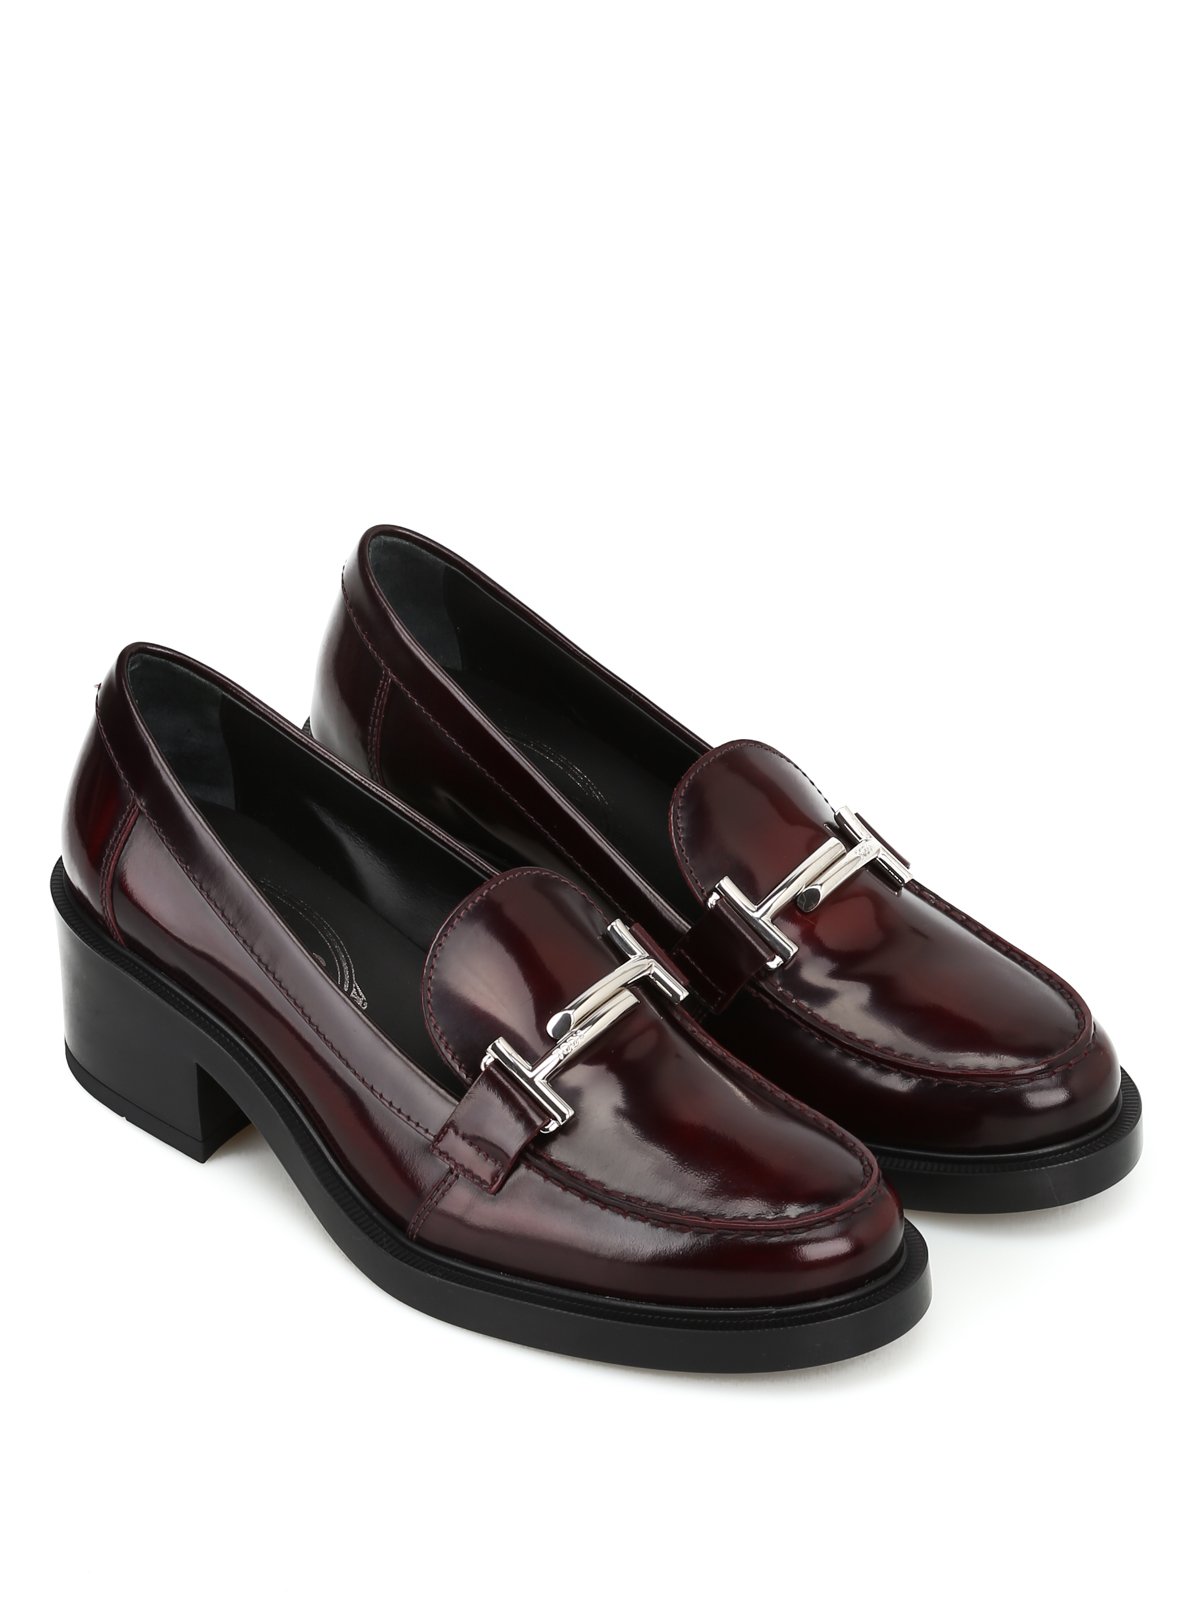 tod's heeled loafers